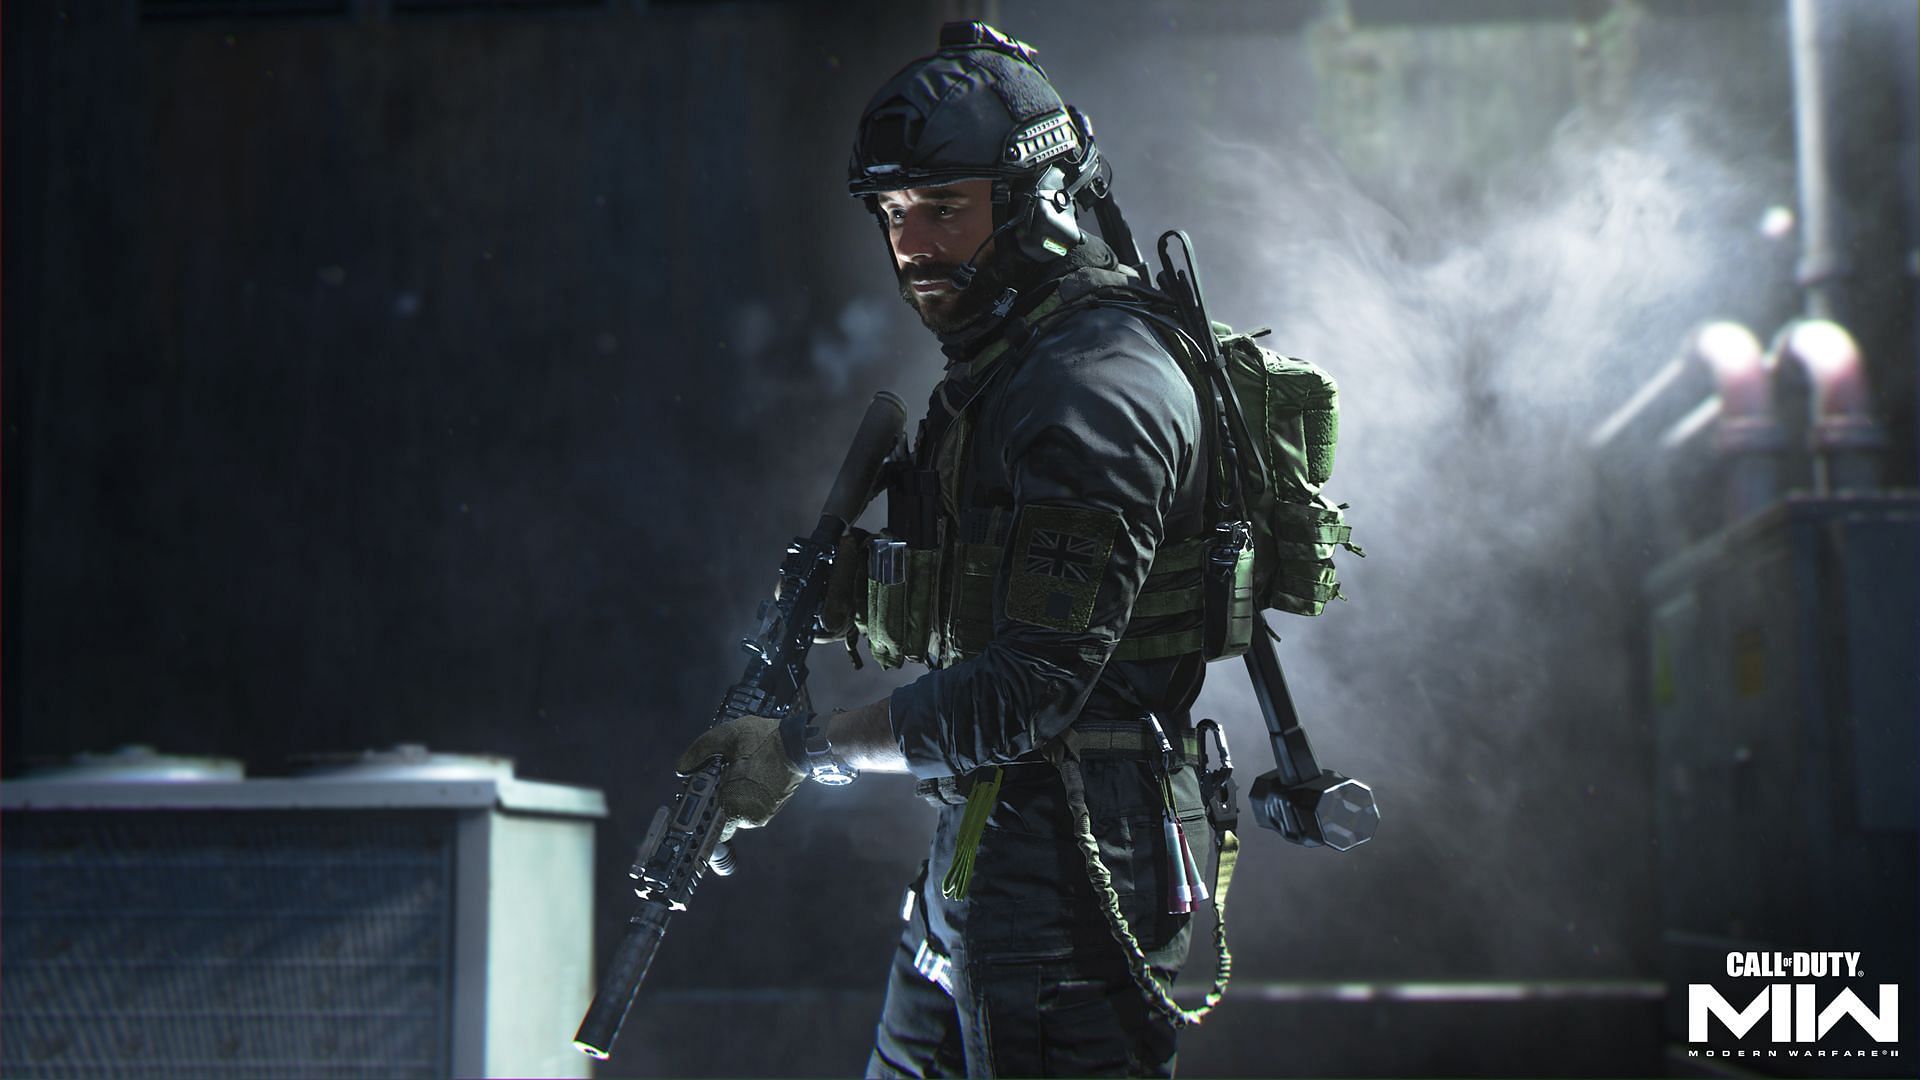 Call of Duty: Modern Warfare 2 is too big to fail (image via Activision)